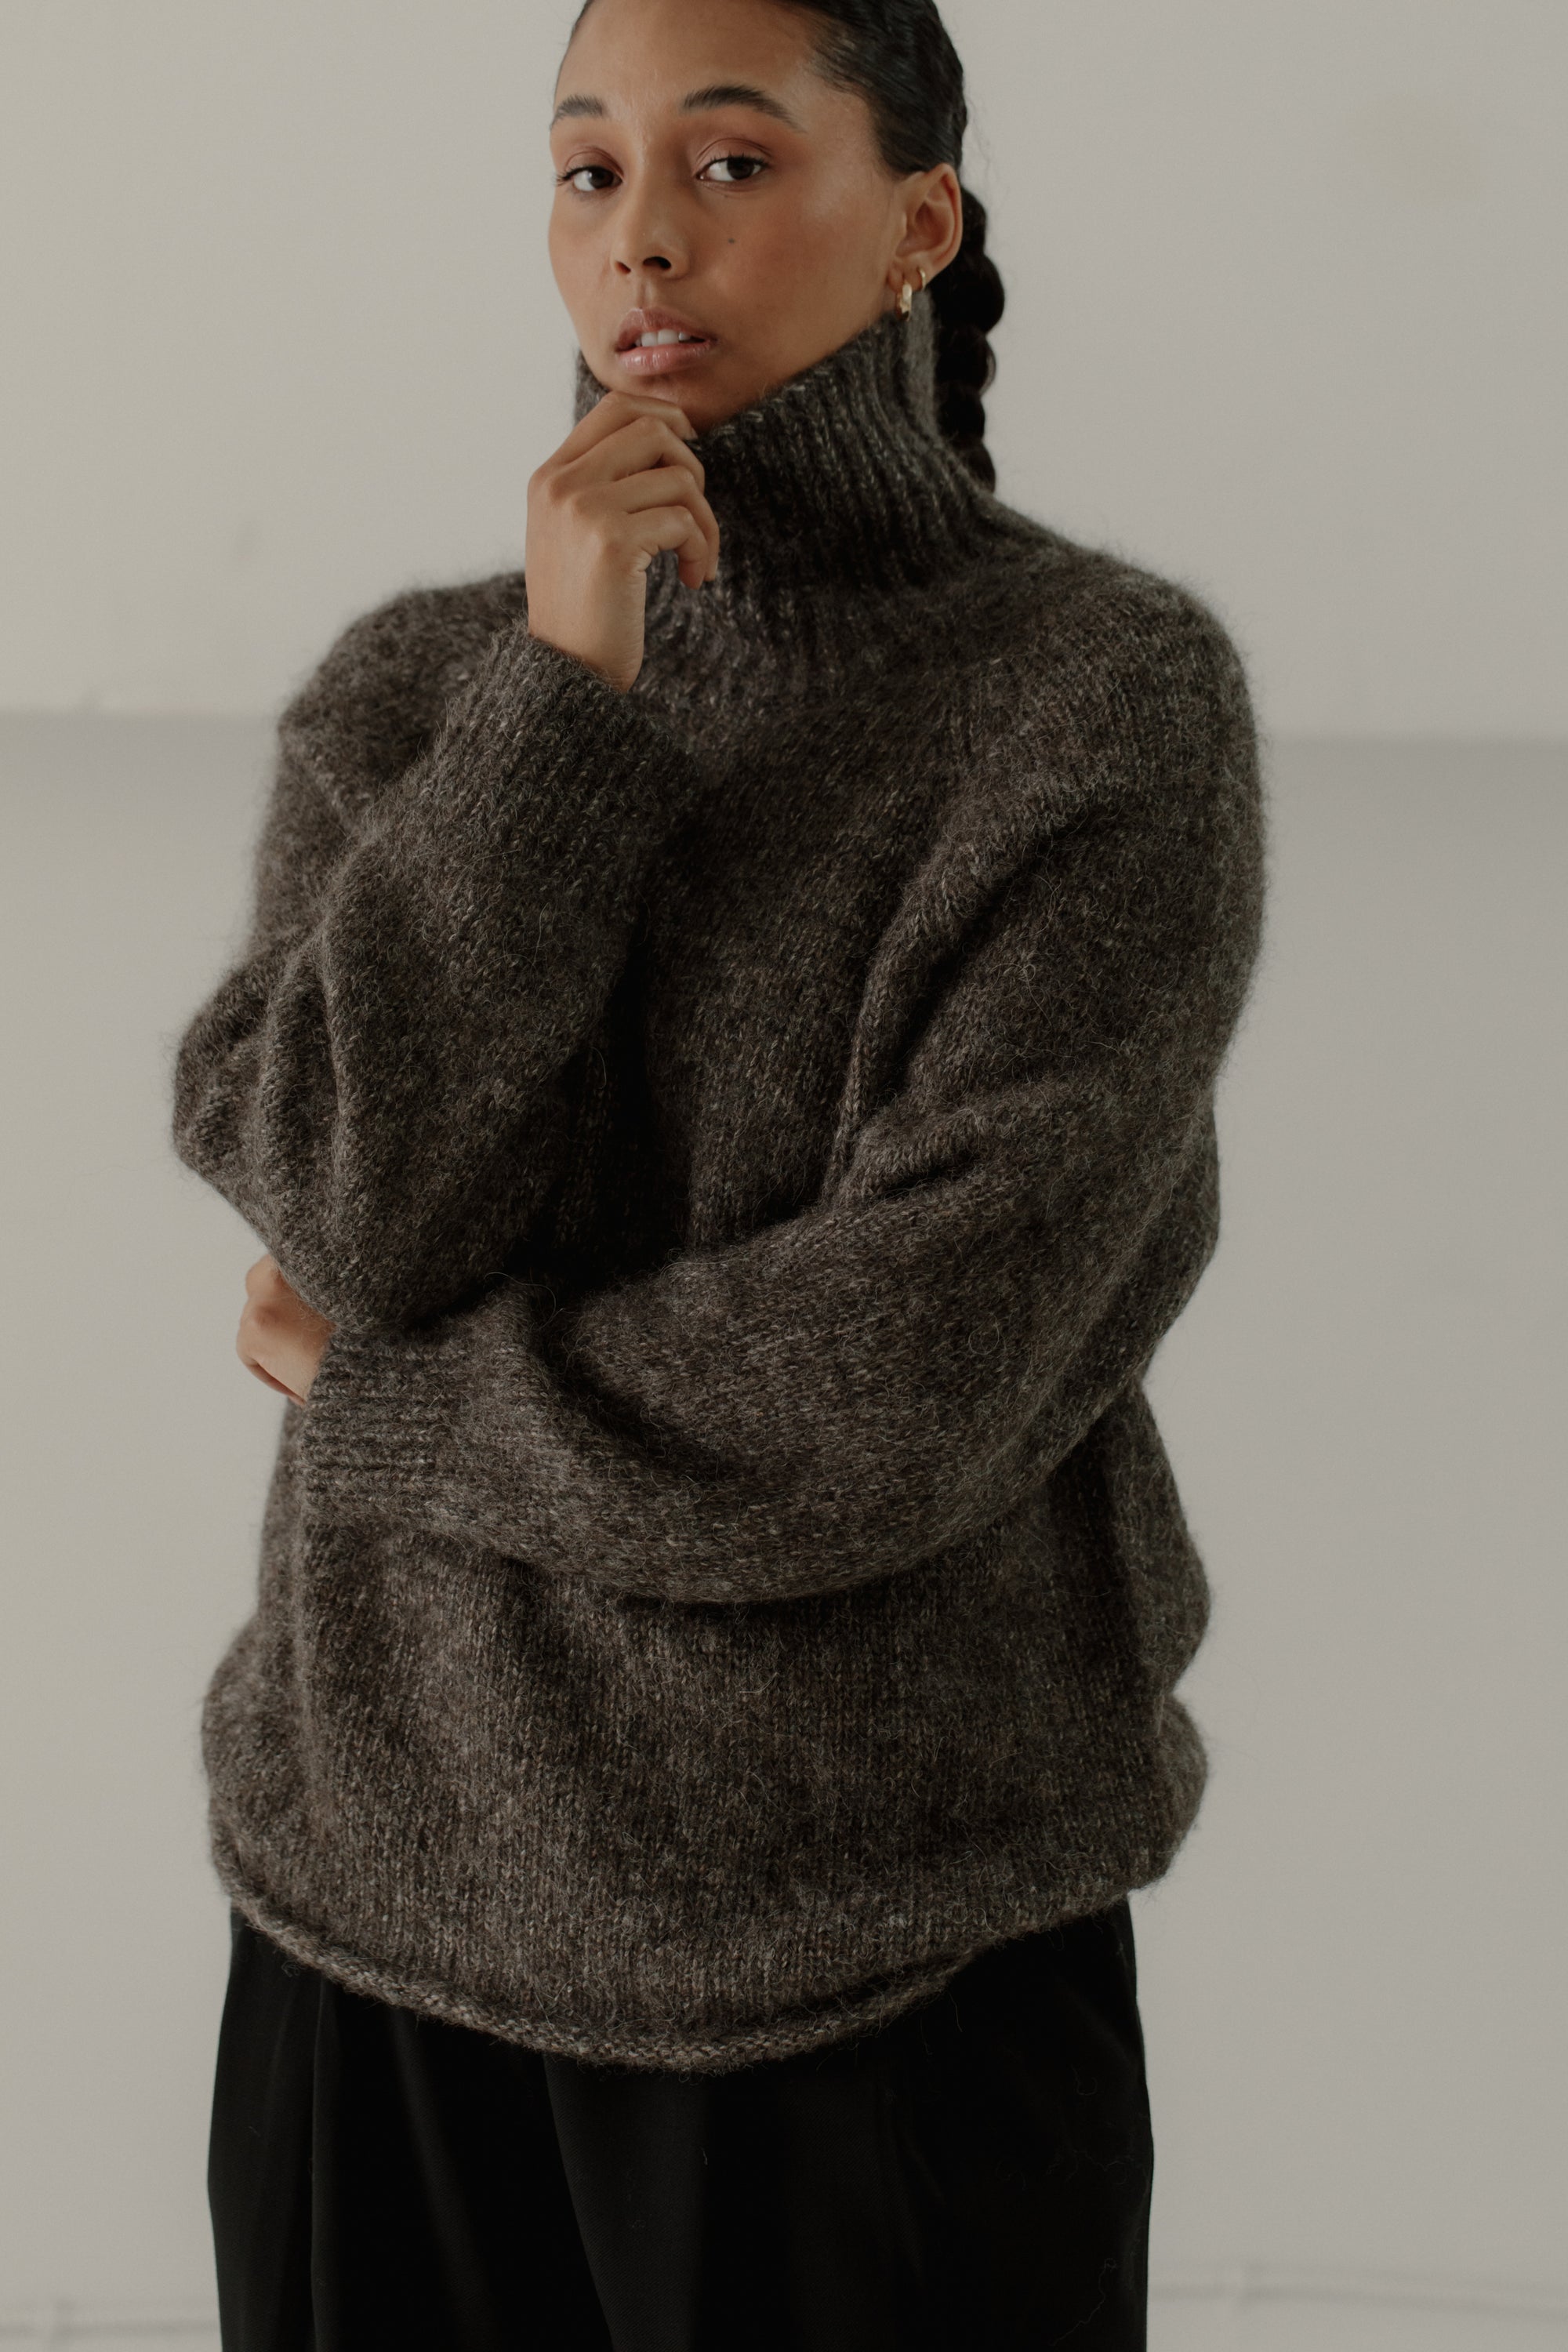 Bare Knitwear Stanley Pullover / Earth